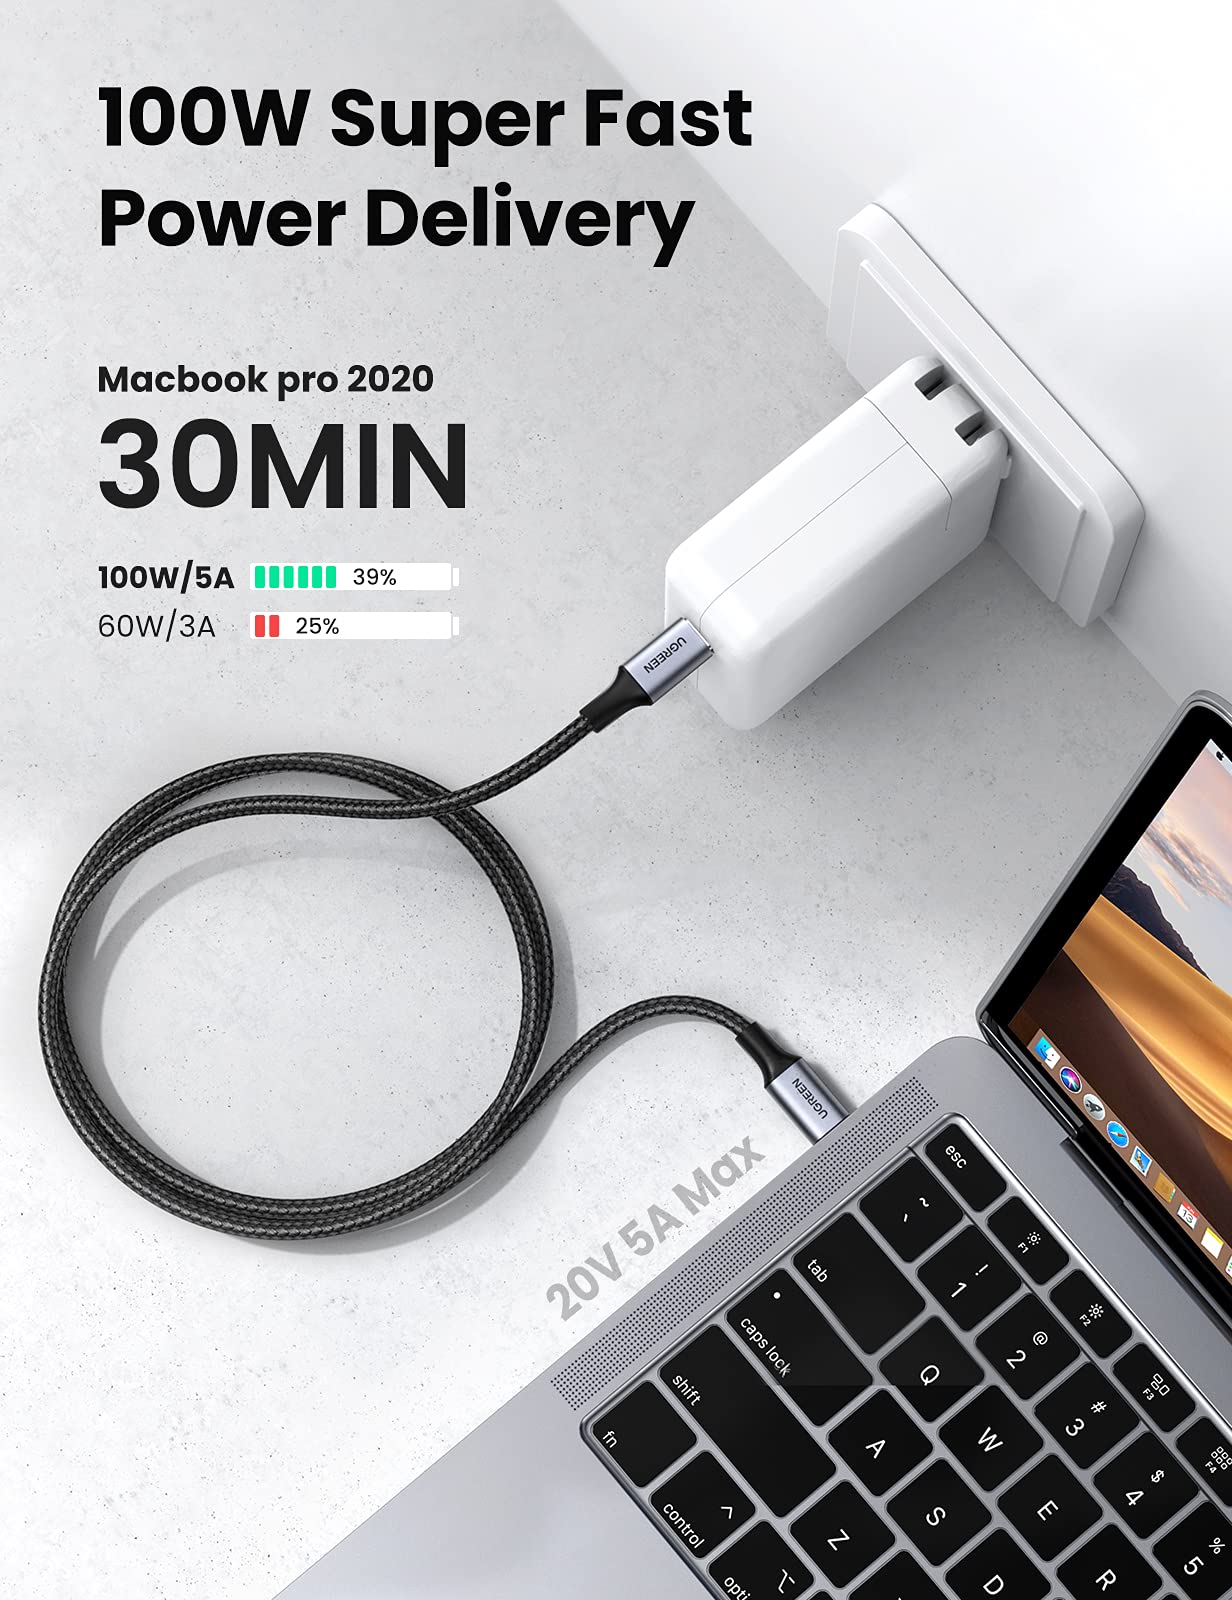 UGREEN USB C to USB C Cable 100W Type C Power Delivery Fast Charging Cord 5A PD Fast Charge Compatible with MacBook Pro, iPad Pro, iPad Mini 6, Google Pixel 6, Galaxy S20 A71, PS5 Controller, 6ft